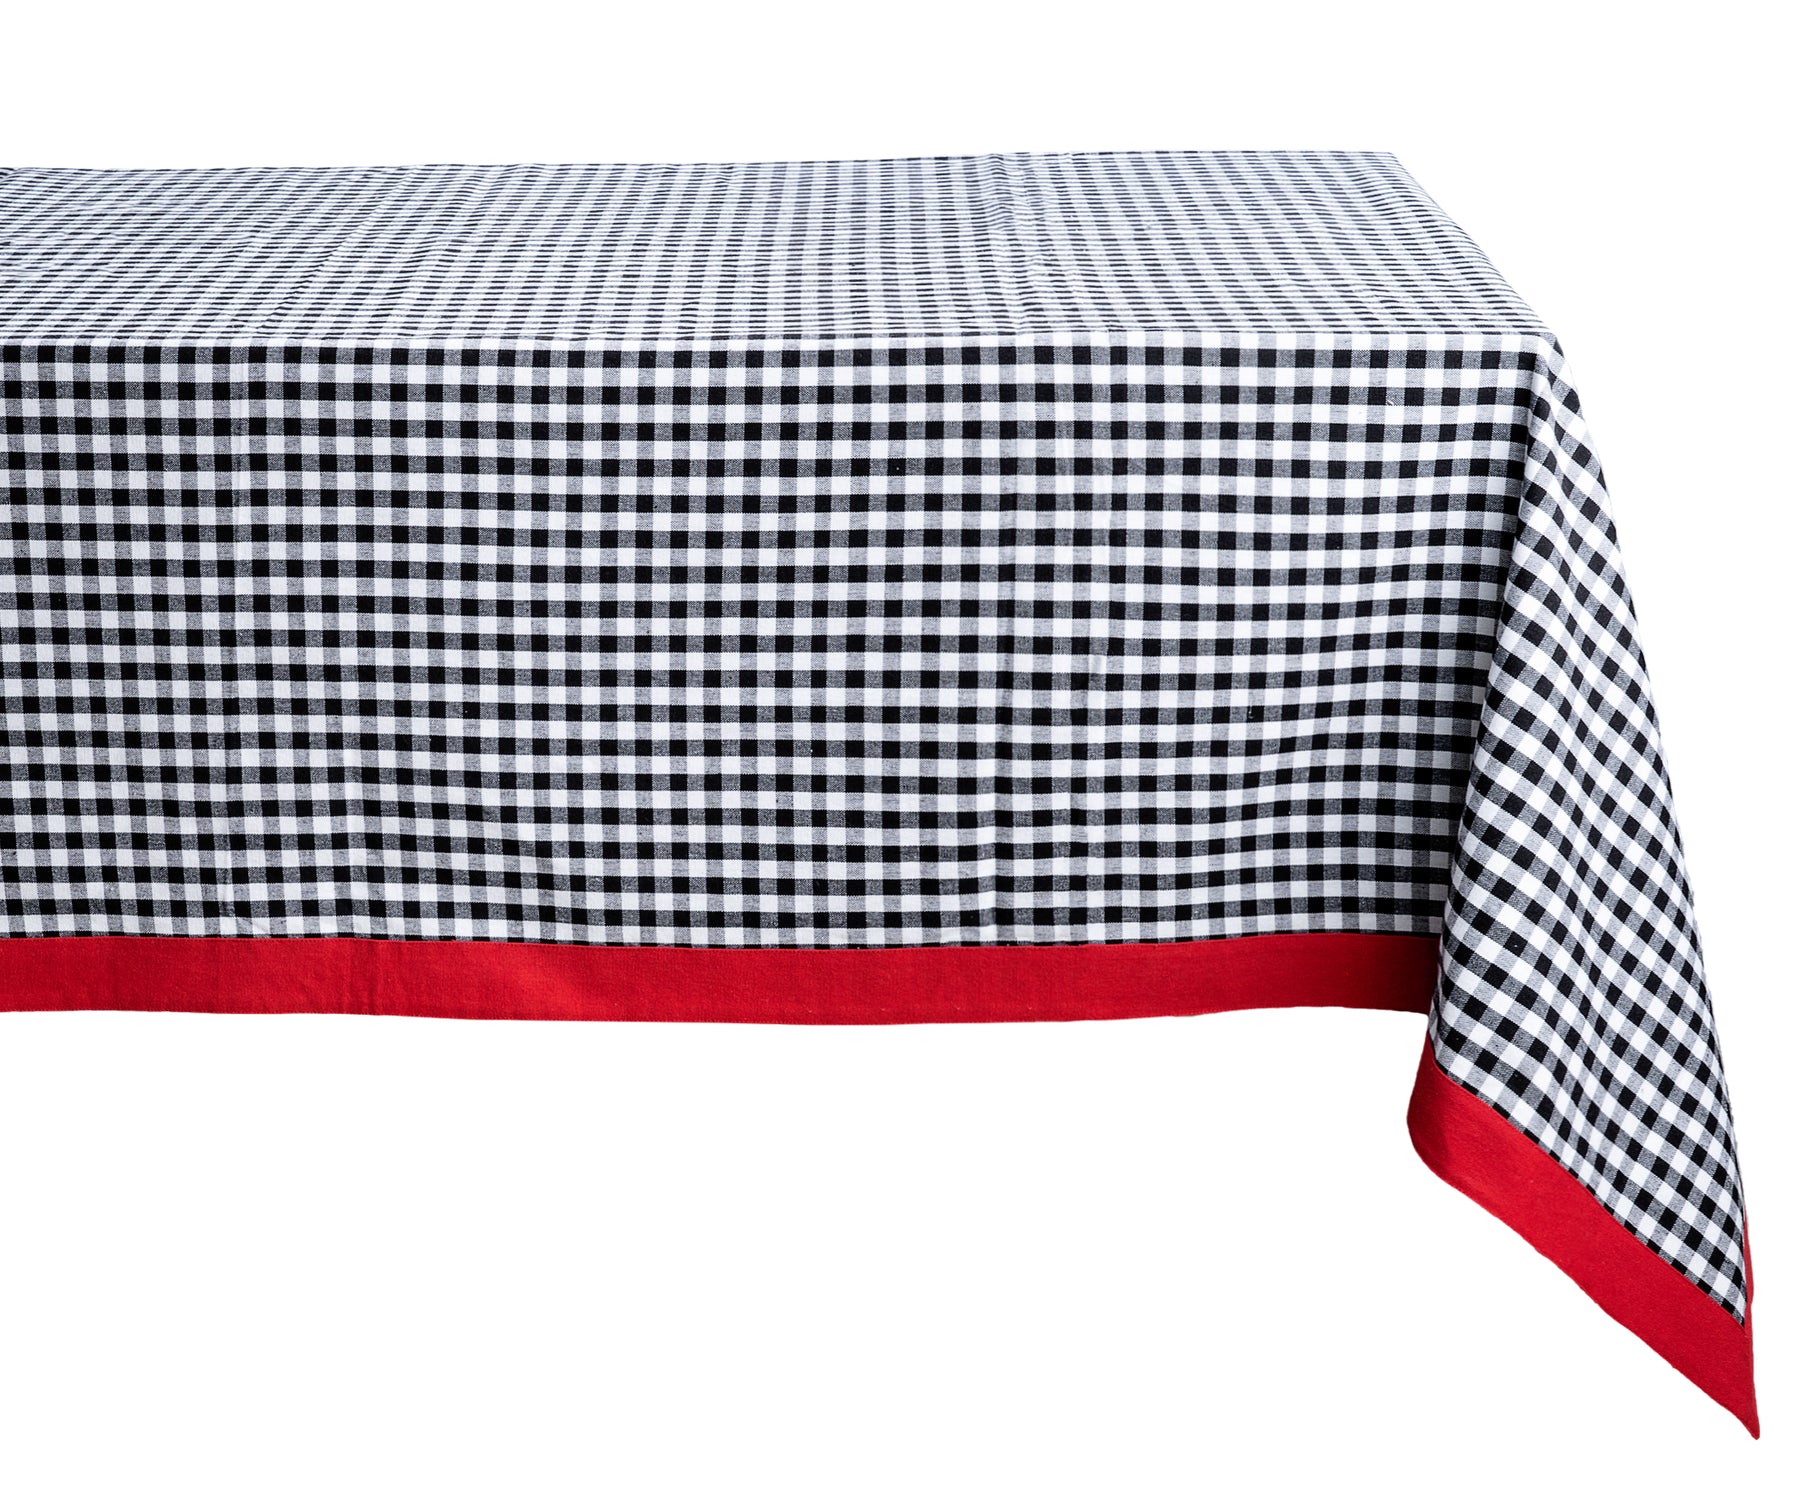 Stylish gingham checkered plaid tablecloth for timeless elegance.